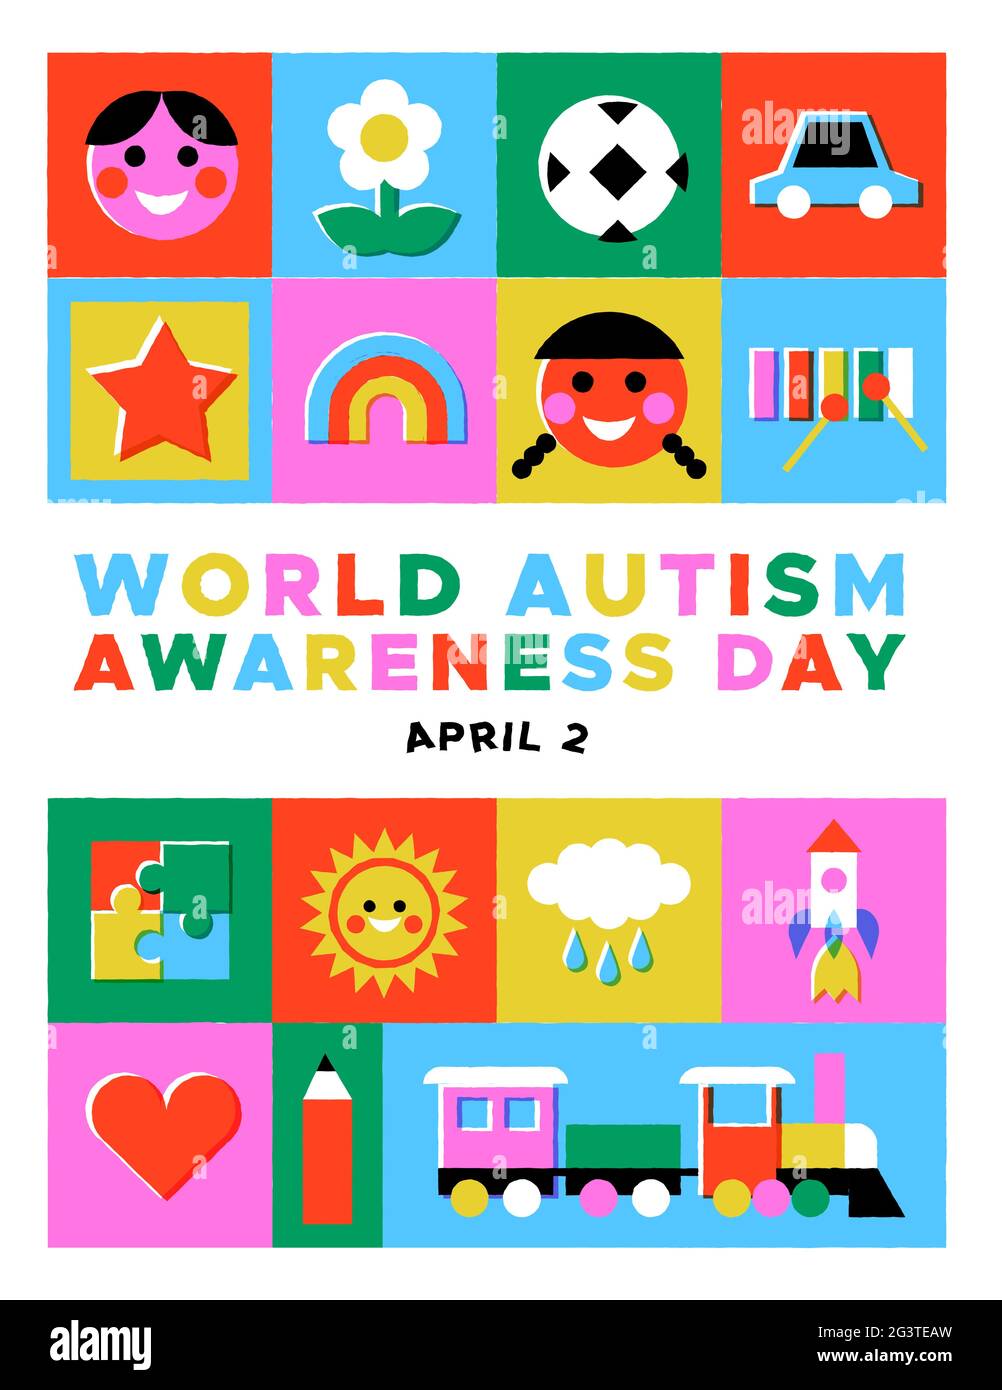 World autism awareness day greeting card illustration of colorful children toy icon mosaic in vintage cartoon style. Autistic kid psychology support c Stock Vector